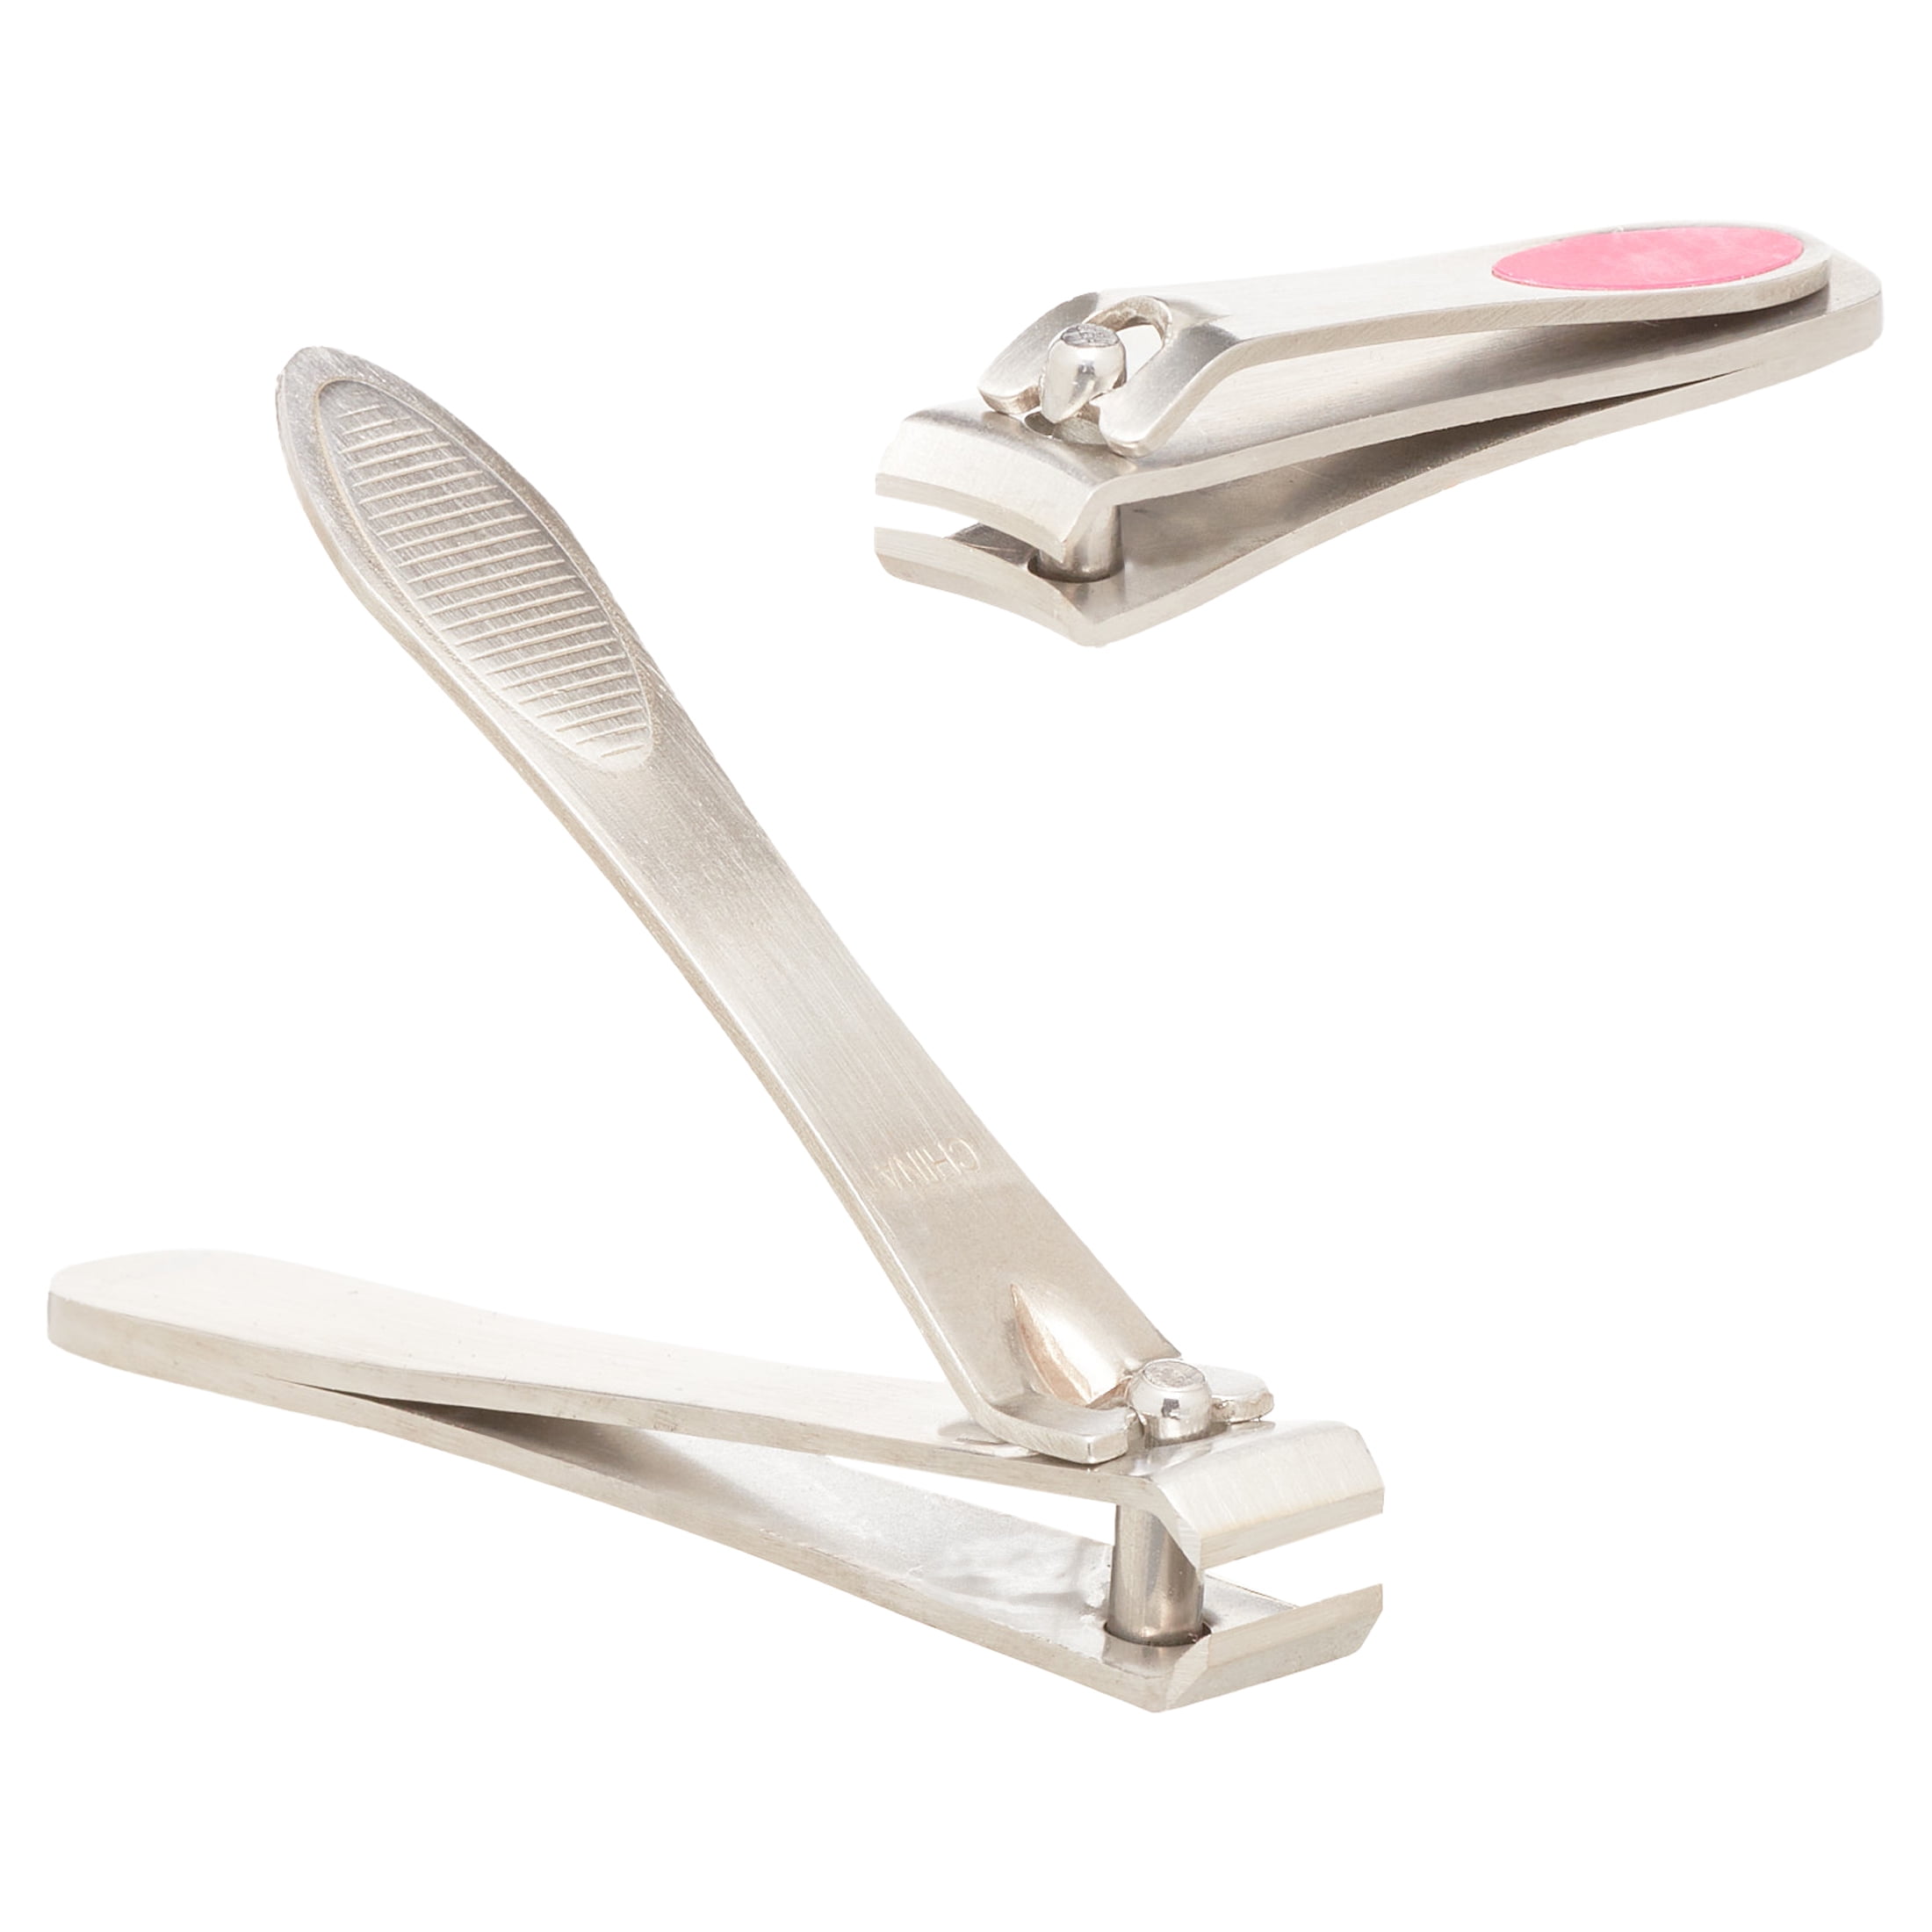 Harperton Nail Clippers Set - 2 Pack Stainless Steel, Professional  Fingernail & Toenail Clippers for Thick Nails (Straight & Curved)